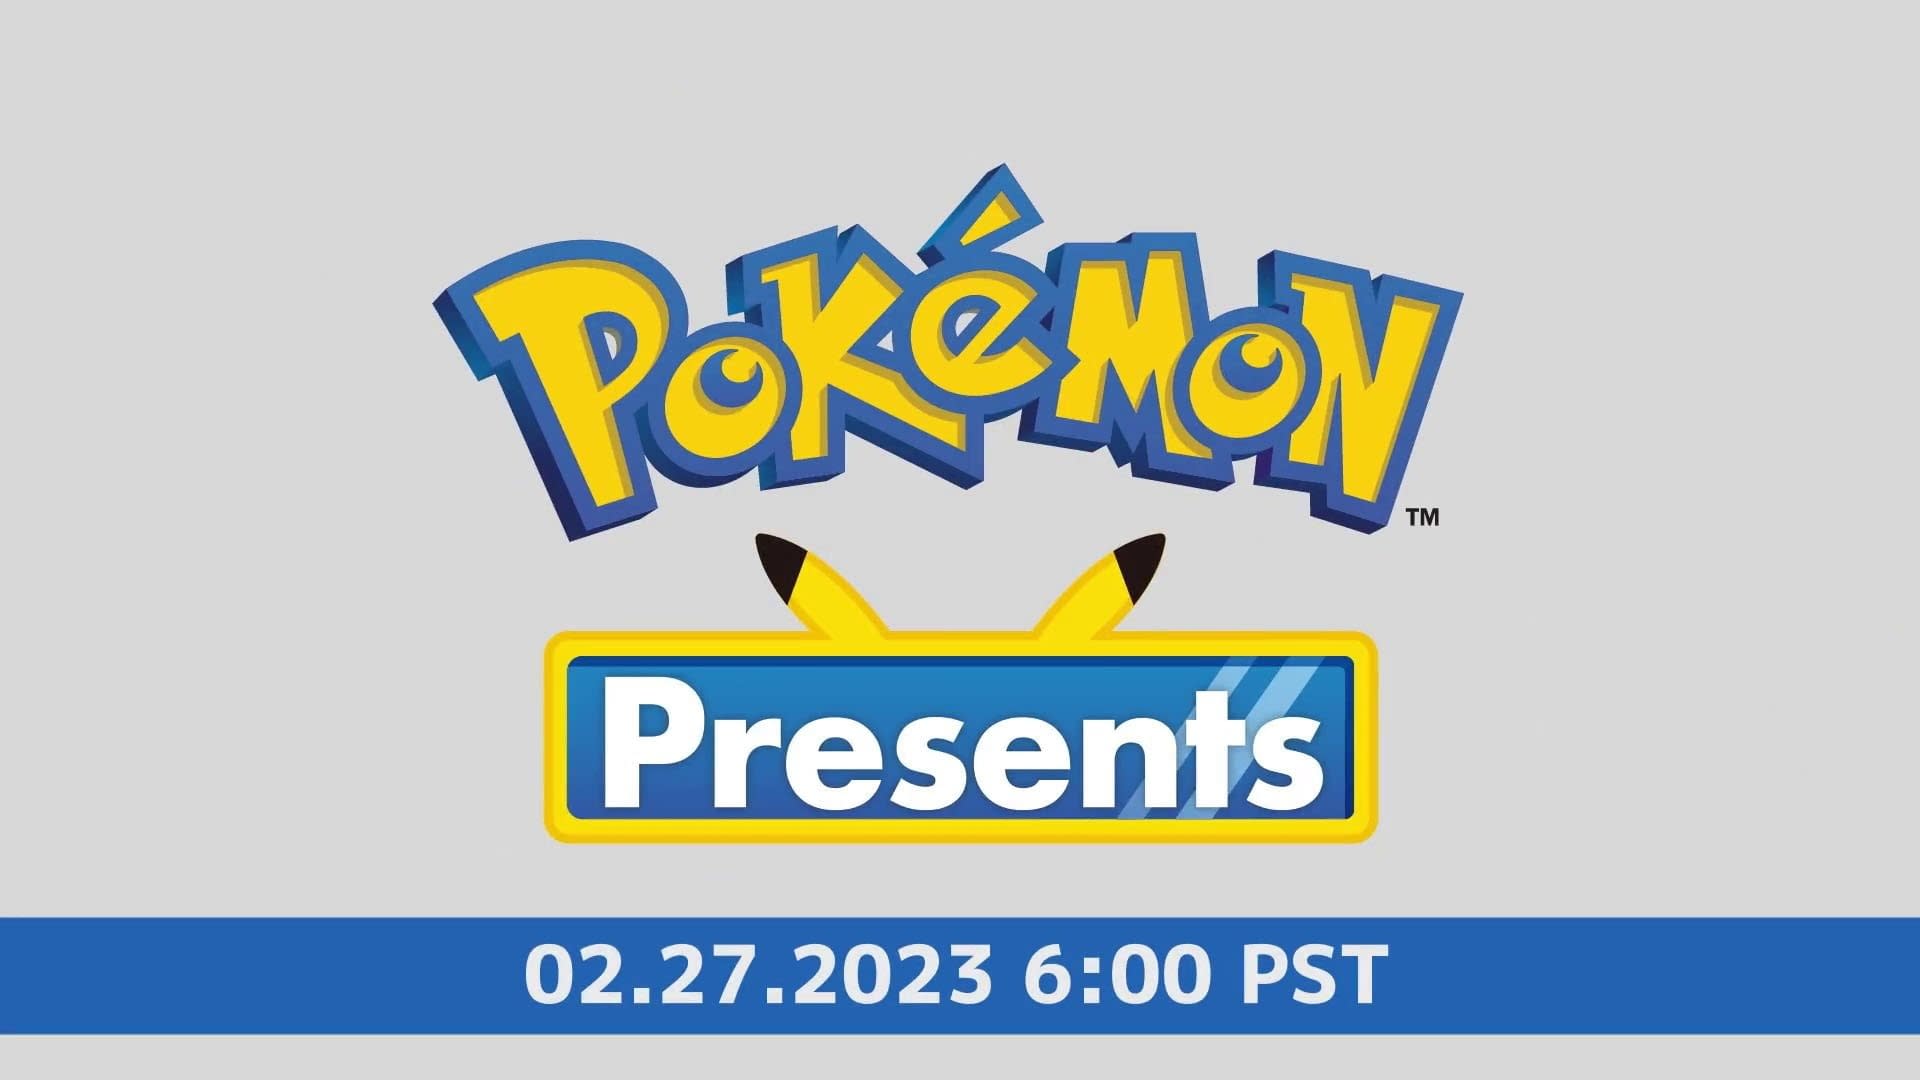 The Pokemon Company will organize 20 minutes event on February 27